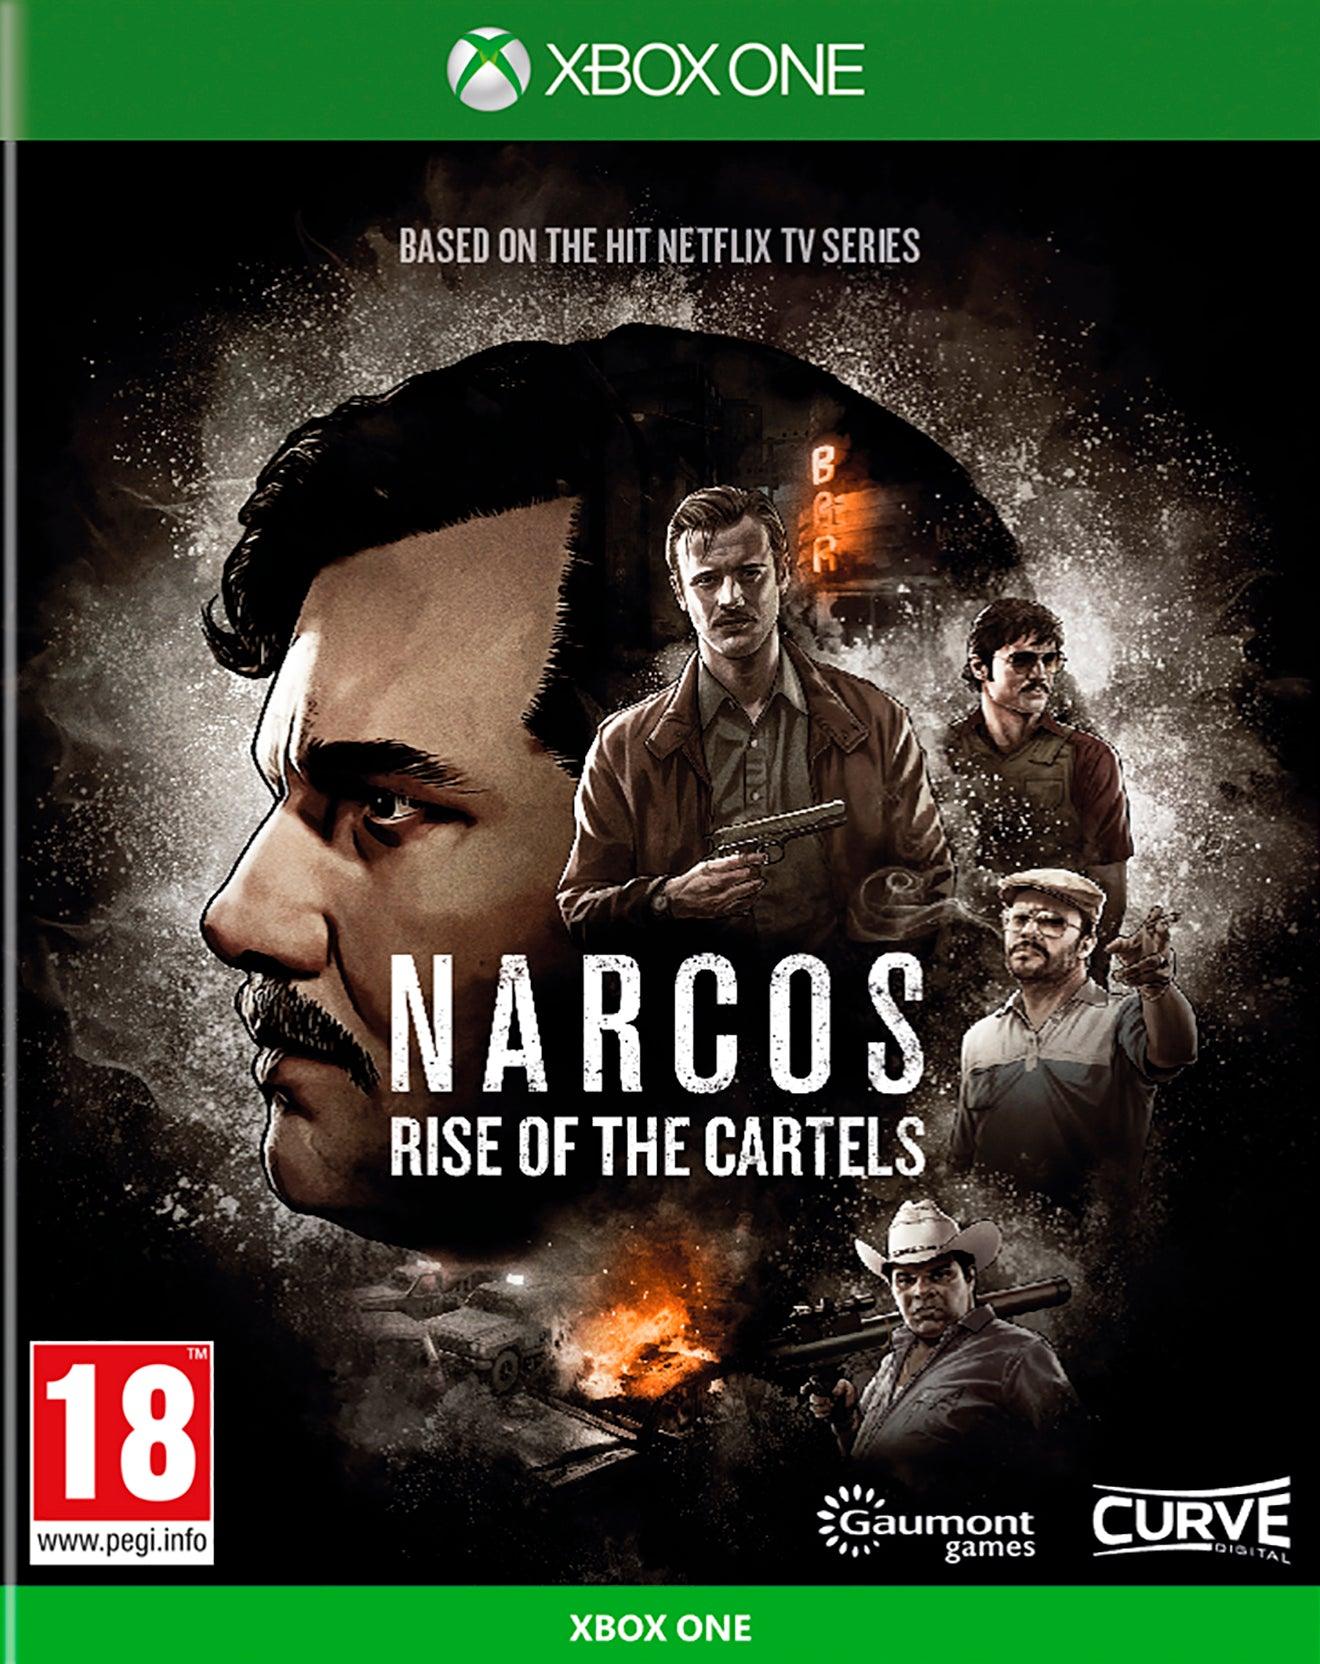 Narcos Rise Of The Cartels - Want a New Gadget